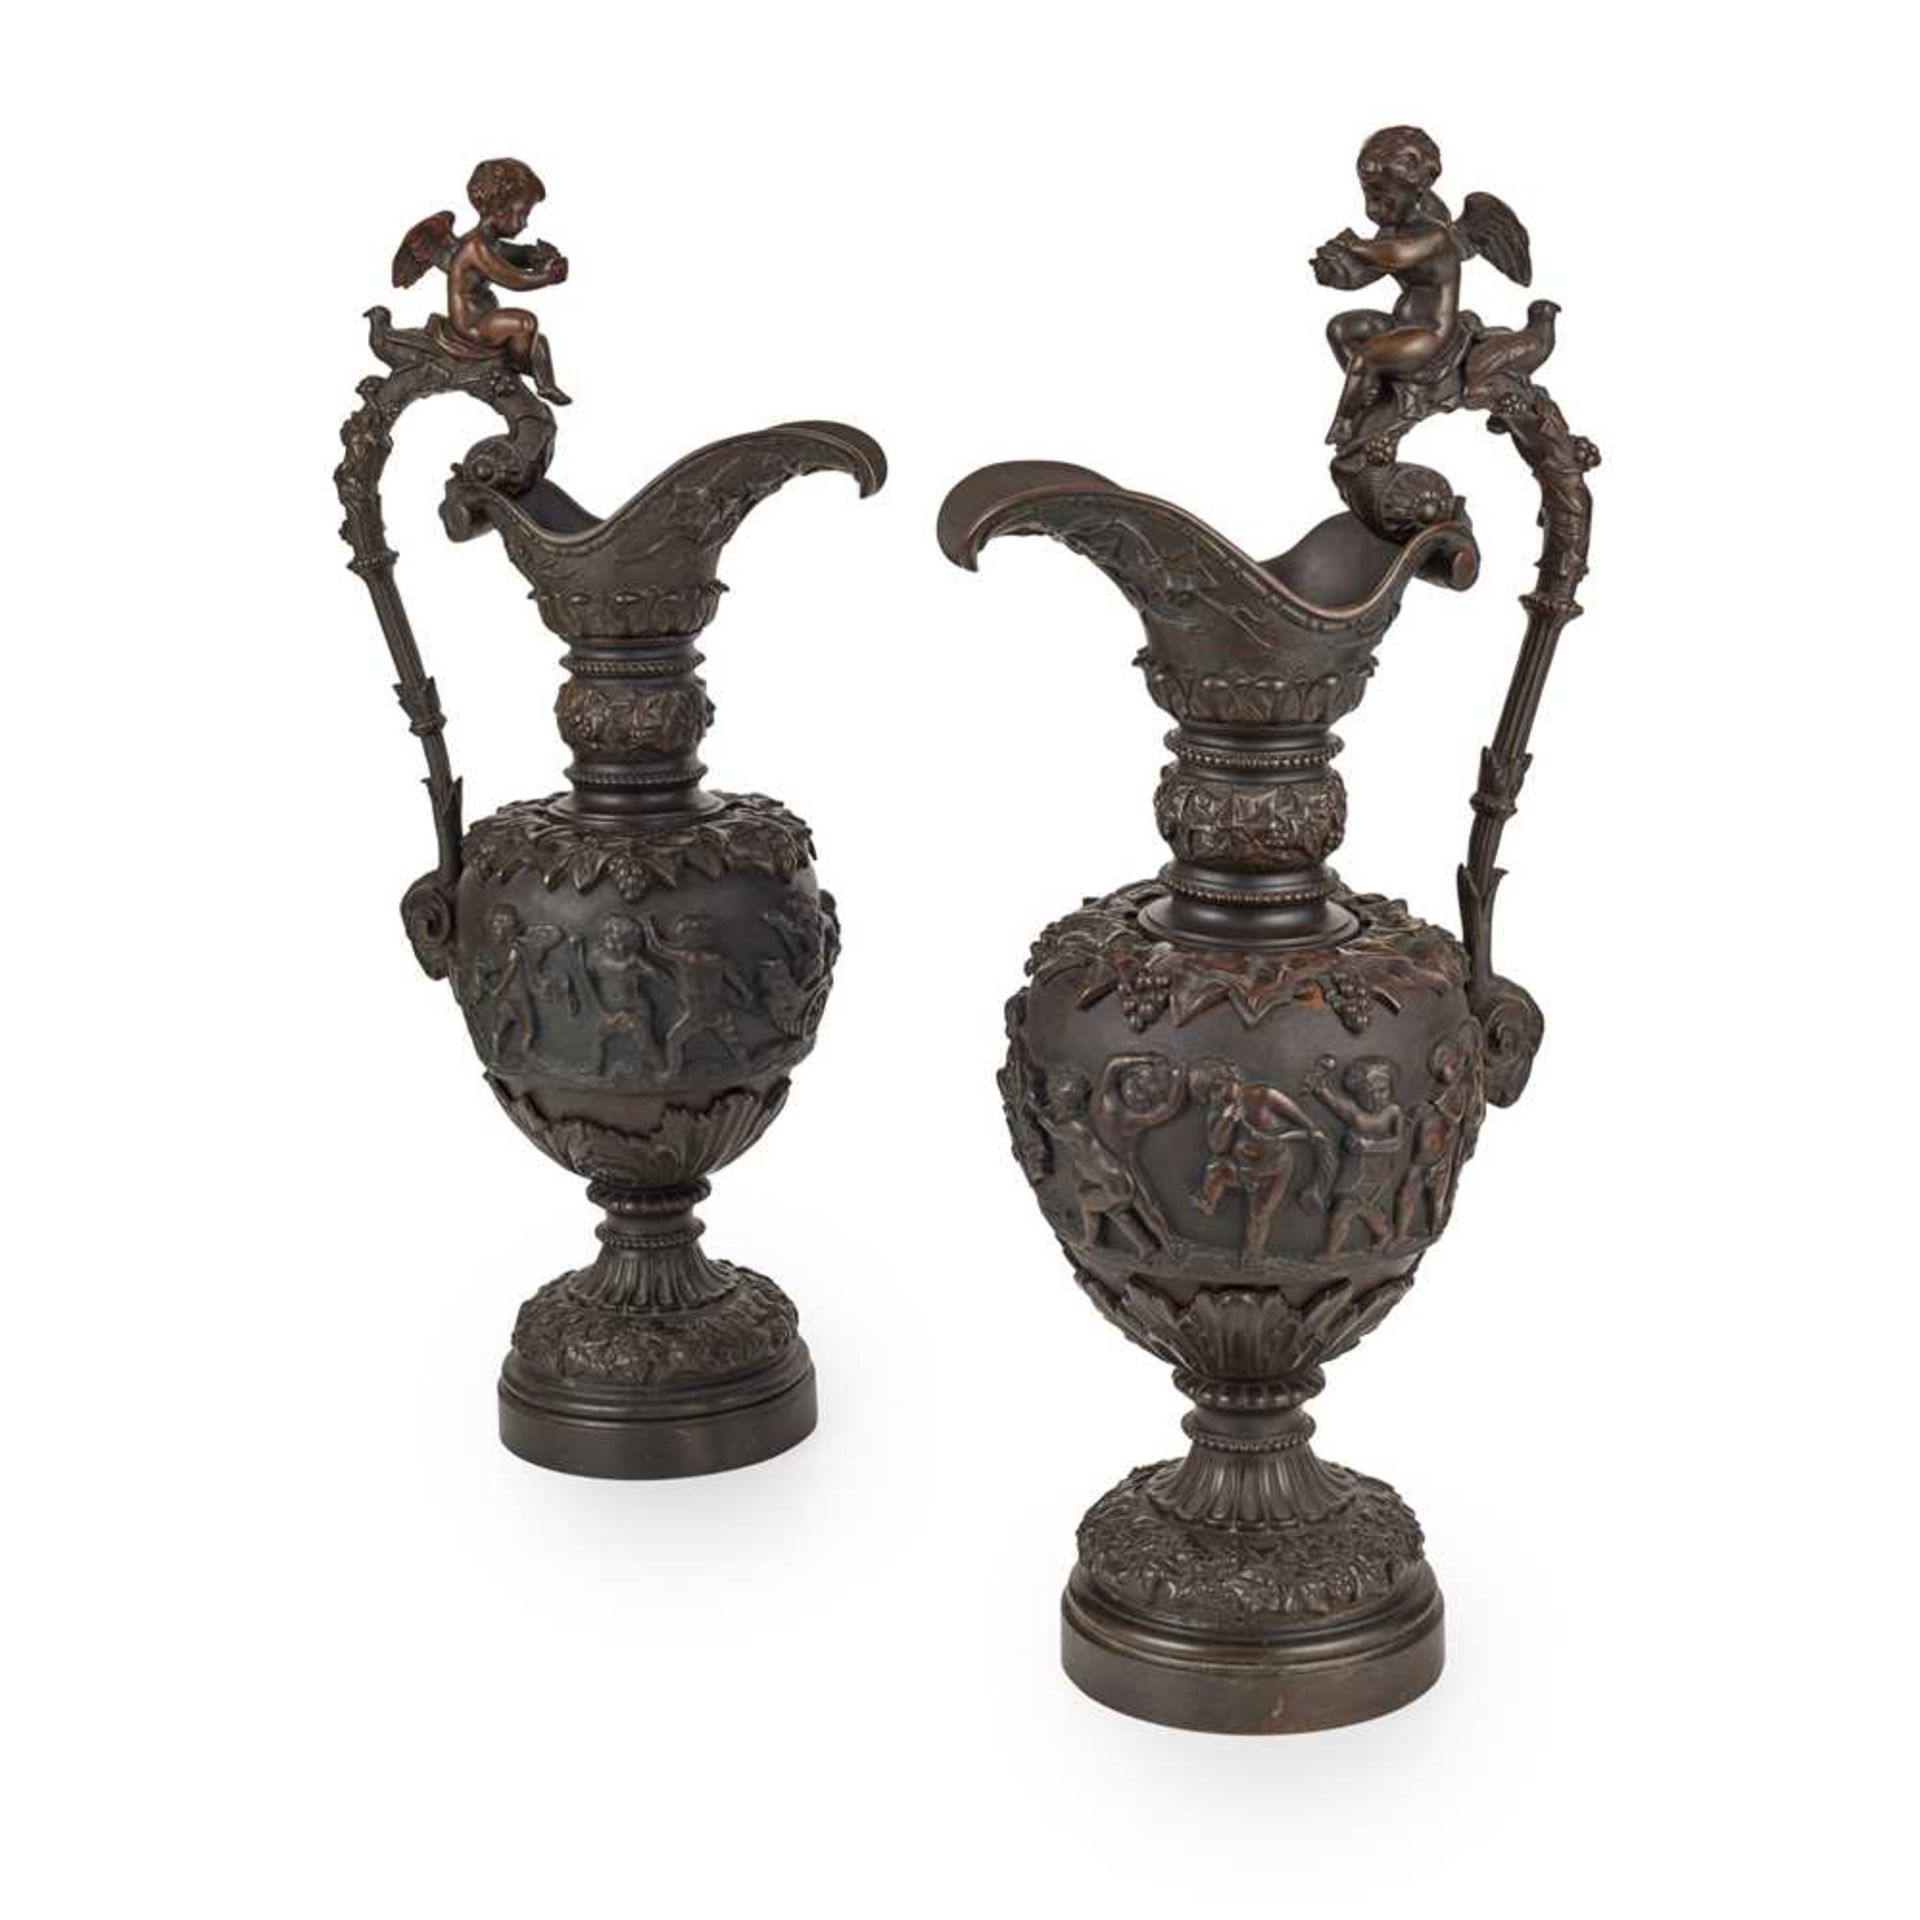 PAIR OF FRENCH RENAISSANCE STYLE BRONZE EWERS 19TH CENTURY